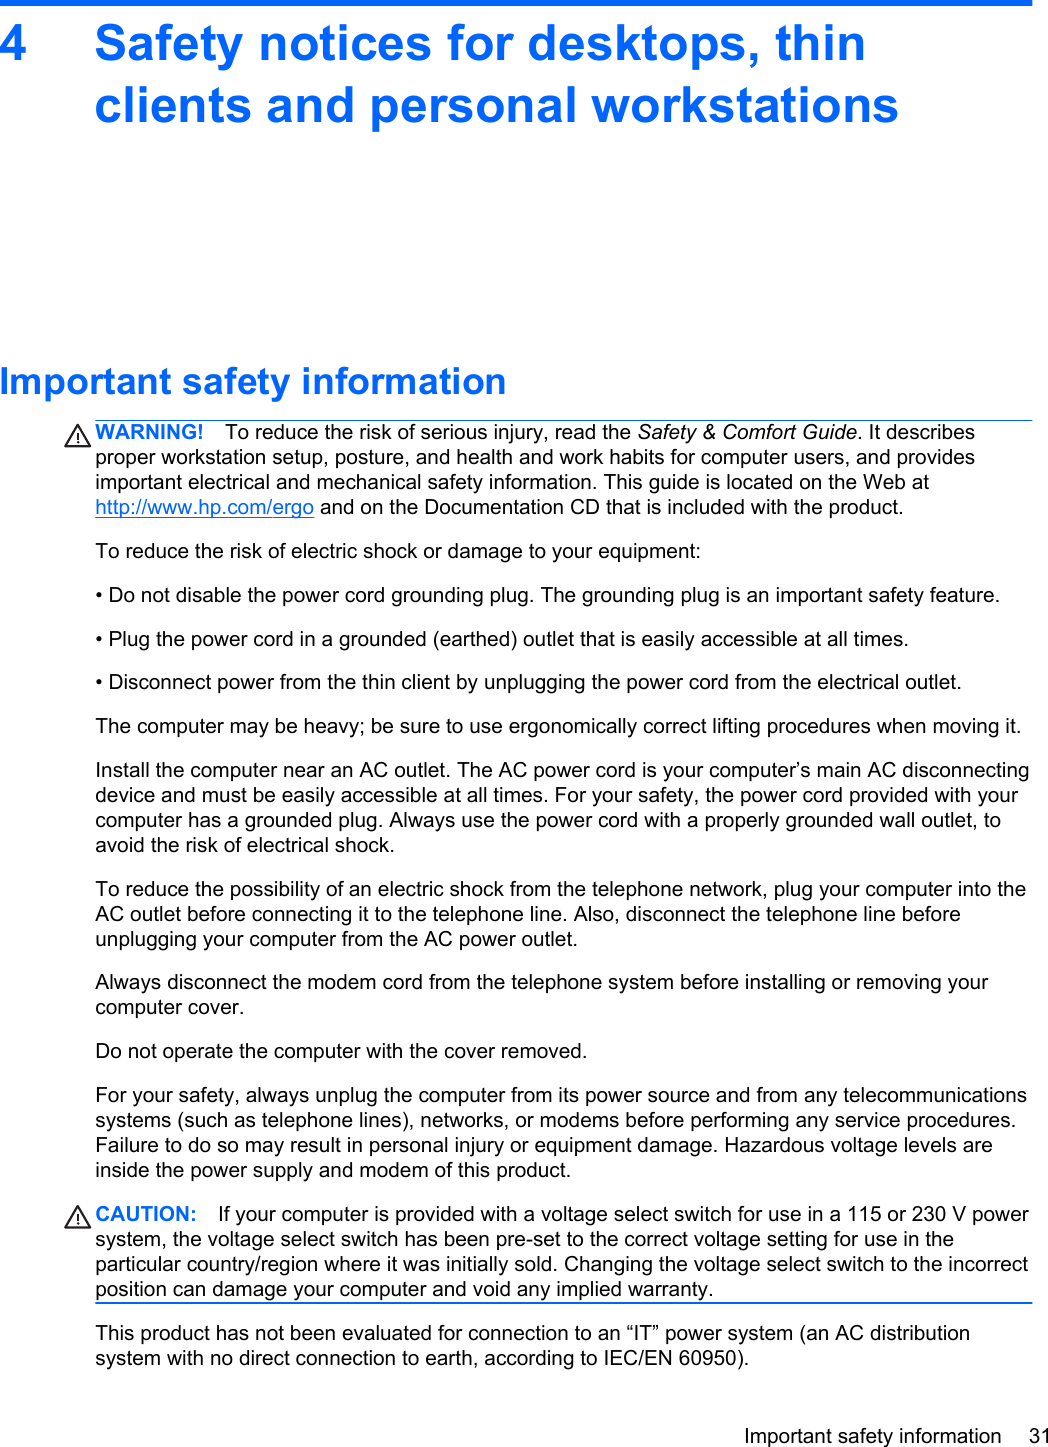 4 Safety notices for desktops, thinclients and personal workstationsImportant safety informationWARNING! To reduce the risk of serious injury, read the Safety &amp; Comfort Guide. It describesproper workstation setup, posture, and health and work habits for computer users, and providesimportant electrical and mechanical safety information. This guide is located on the Web athttp://www.hp.com/ergo and on the Documentation CD that is included with the product.To reduce the risk of electric shock or damage to your equipment:• Do not disable the power cord grounding plug. The grounding plug is an important safety feature.• Plug the power cord in a grounded (earthed) outlet that is easily accessible at all times.• Disconnect power from the thin client by unplugging the power cord from the electrical outlet.The computer may be heavy; be sure to use ergonomically correct lifting procedures when moving it.Install the computer near an AC outlet. The AC power cord is your computer’s main AC disconnectingdevice and must be easily accessible at all times. For your safety, the power cord provided with yourcomputer has a grounded plug. Always use the power cord with a properly grounded wall outlet, toavoid the risk of electrical shock.To reduce the possibility of an electric shock from the telephone network, plug your computer into theAC outlet before connecting it to the telephone line. Also, disconnect the telephone line beforeunplugging your computer from the AC power outlet.Always disconnect the modem cord from the telephone system before installing or removing yourcomputer cover.Do not operate the computer with the cover removed.For your safety, always unplug the computer from its power source and from any telecommunicationssystems (such as telephone lines), networks, or modems before performing any service procedures.Failure to do so may result in personal injury or equipment damage. Hazardous voltage levels areinside the power supply and modem of this product.CAUTION: If your computer is provided with a voltage select switch for use in a 115 or 230 V powersystem, the voltage select switch has been pre-set to the correct voltage setting for use in theparticular country/region where it was initially sold. Changing the voltage select switch to the incorrectposition can damage your computer and void any implied warranty.This product has not been evaluated for connection to an “IT” power system (an AC distributionsystem with no direct connection to earth, according to IEC/EN 60950).Important safety information 31